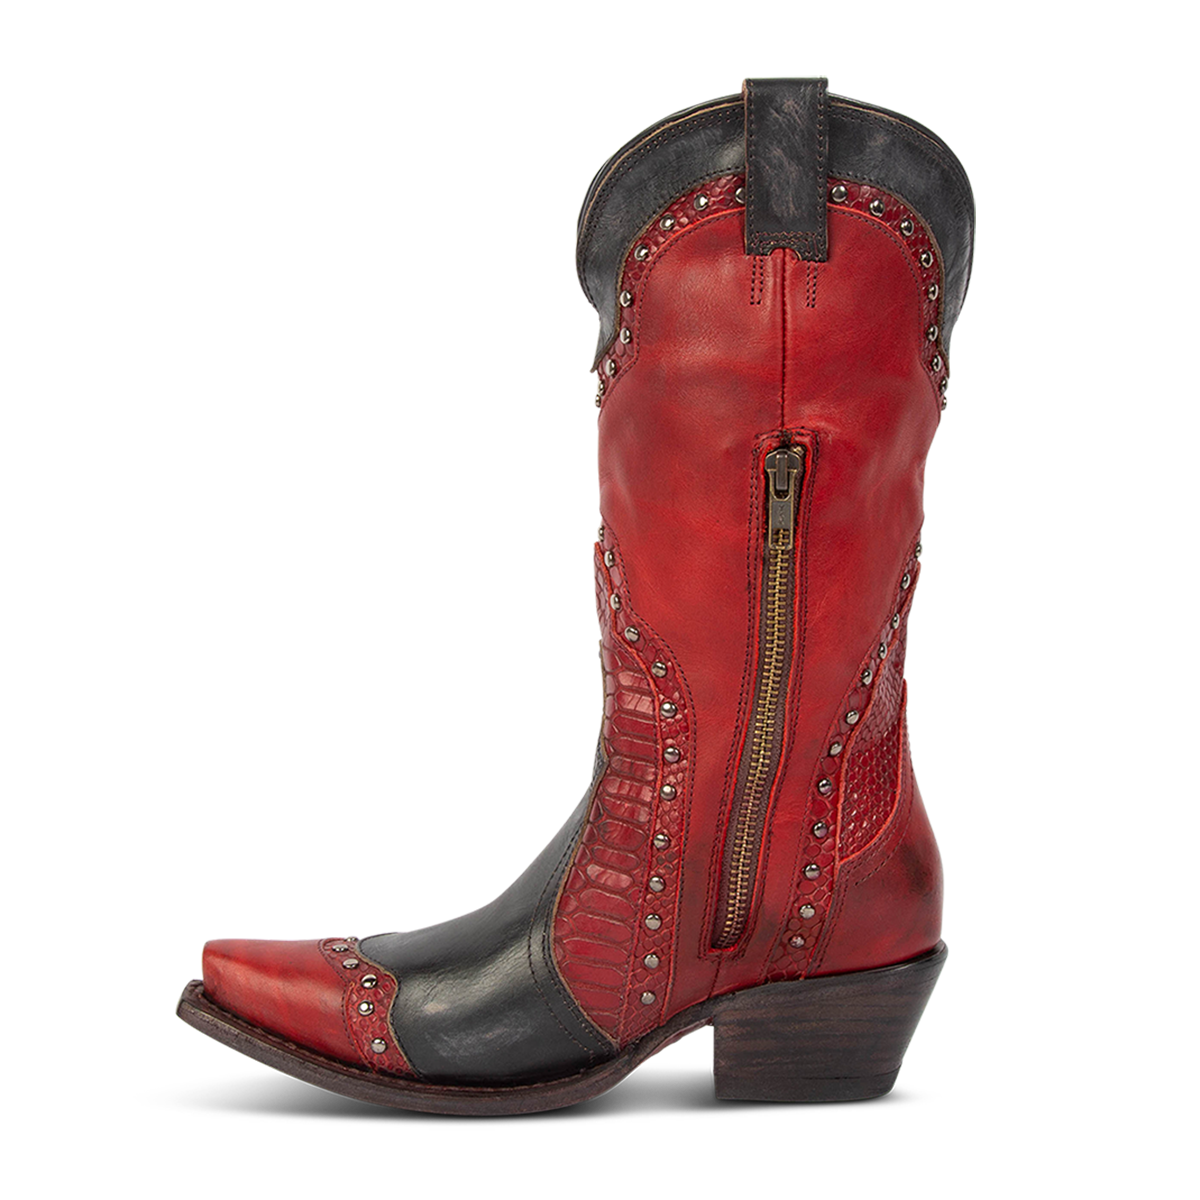 Side view showing inside zip closure and stud detailing on FREEBIRD women's Warner red multi leather western cowboy boot